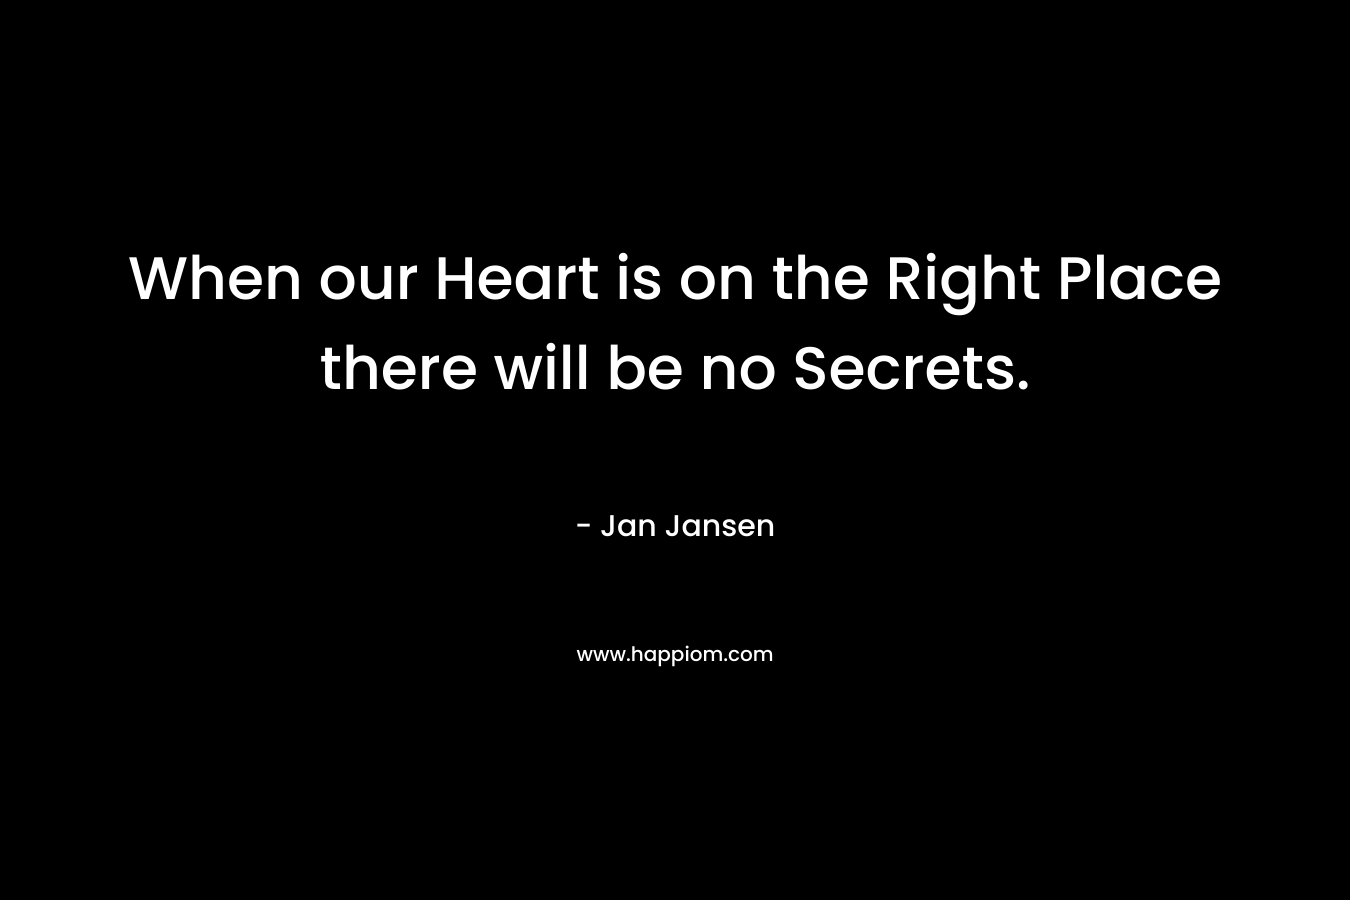 When our Heart is on the Right Place there will be no Secrets.